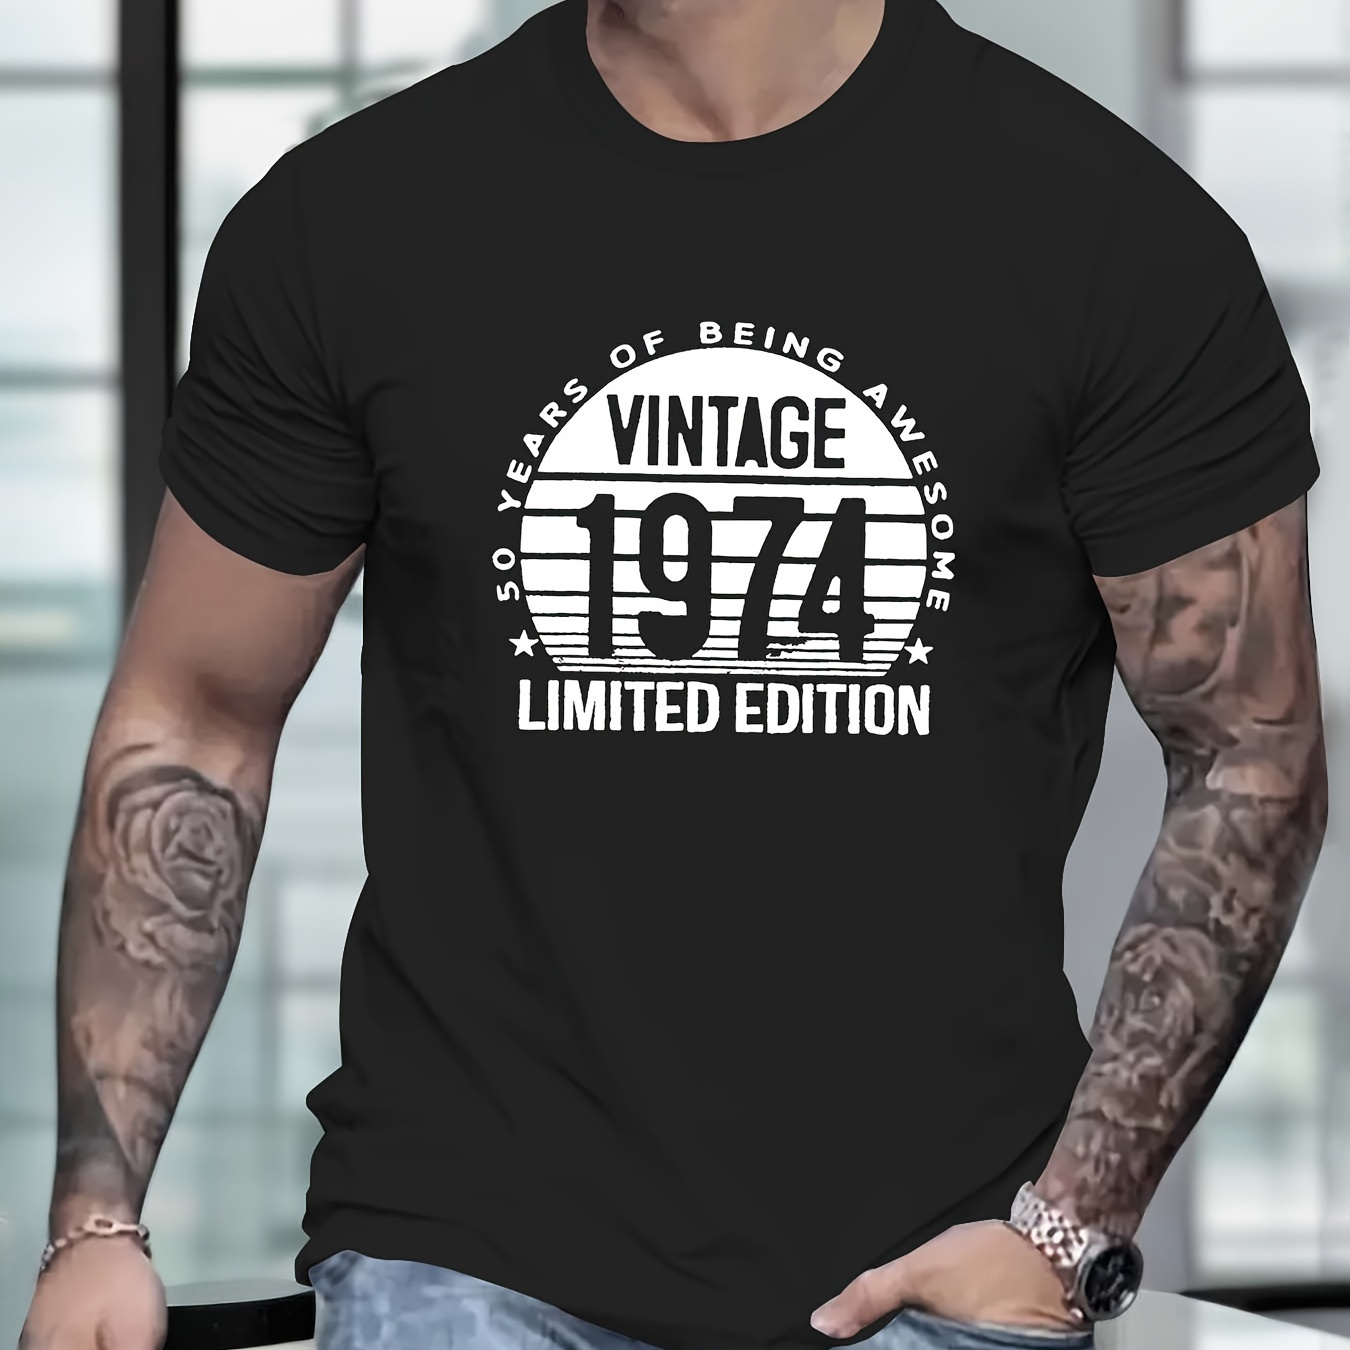 

1974 Graphic Men's Short Sleeve T-shirt, Comfy Stretchy Trendy Tees For Summer, Casual Daily Style Fashion Clothing, As Gifts